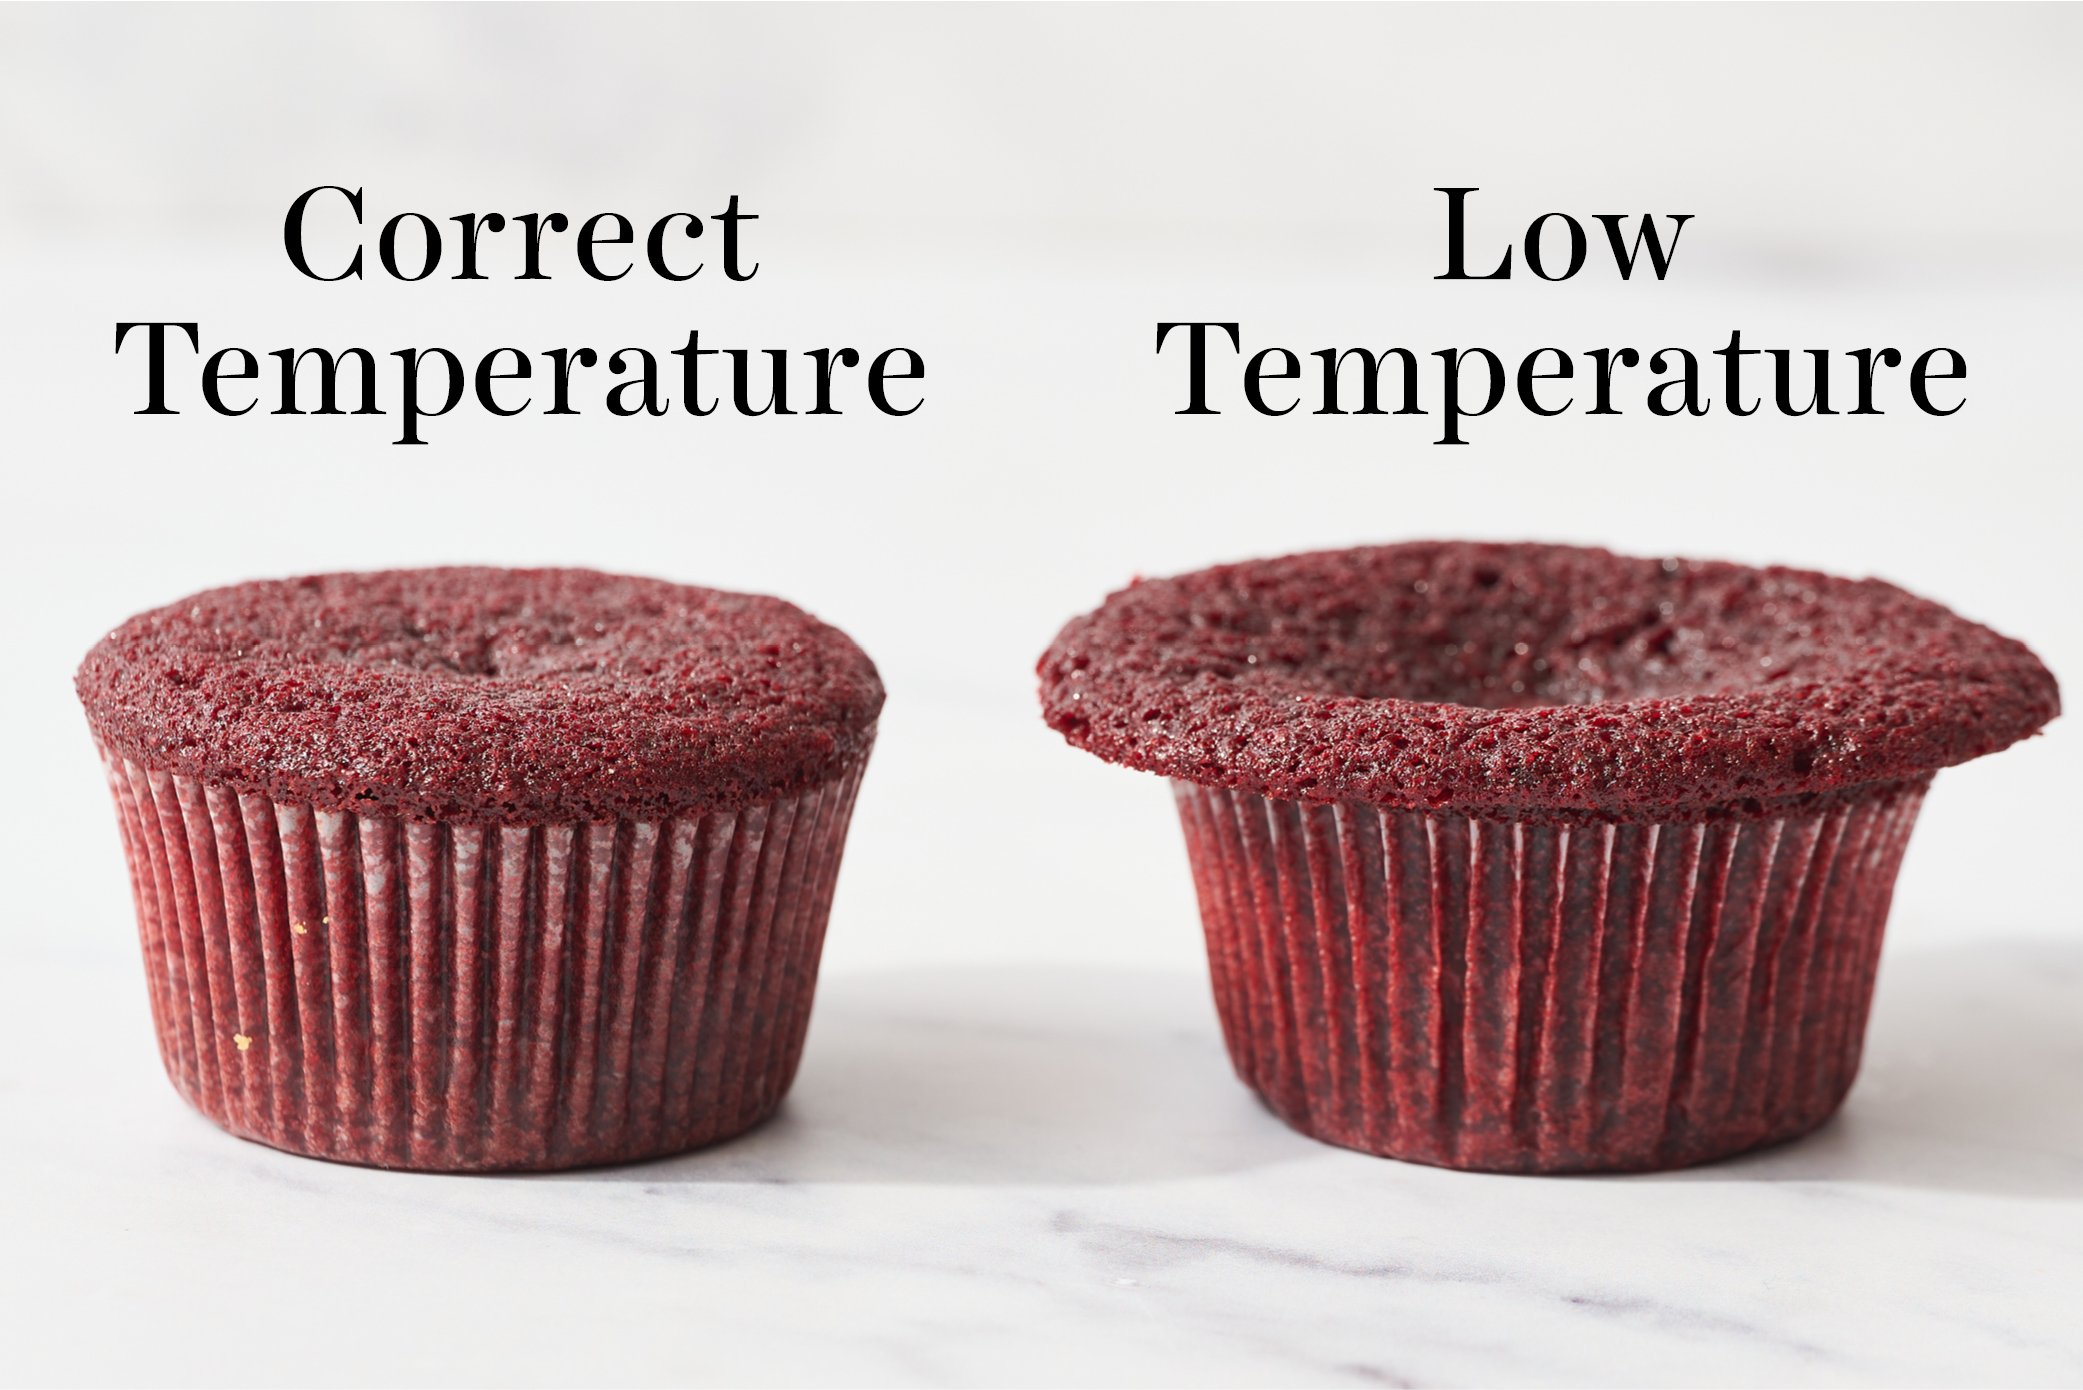 side-by-side comparison between two cupcakes baked at the correct temperature vs. the incorrect low temperature. 